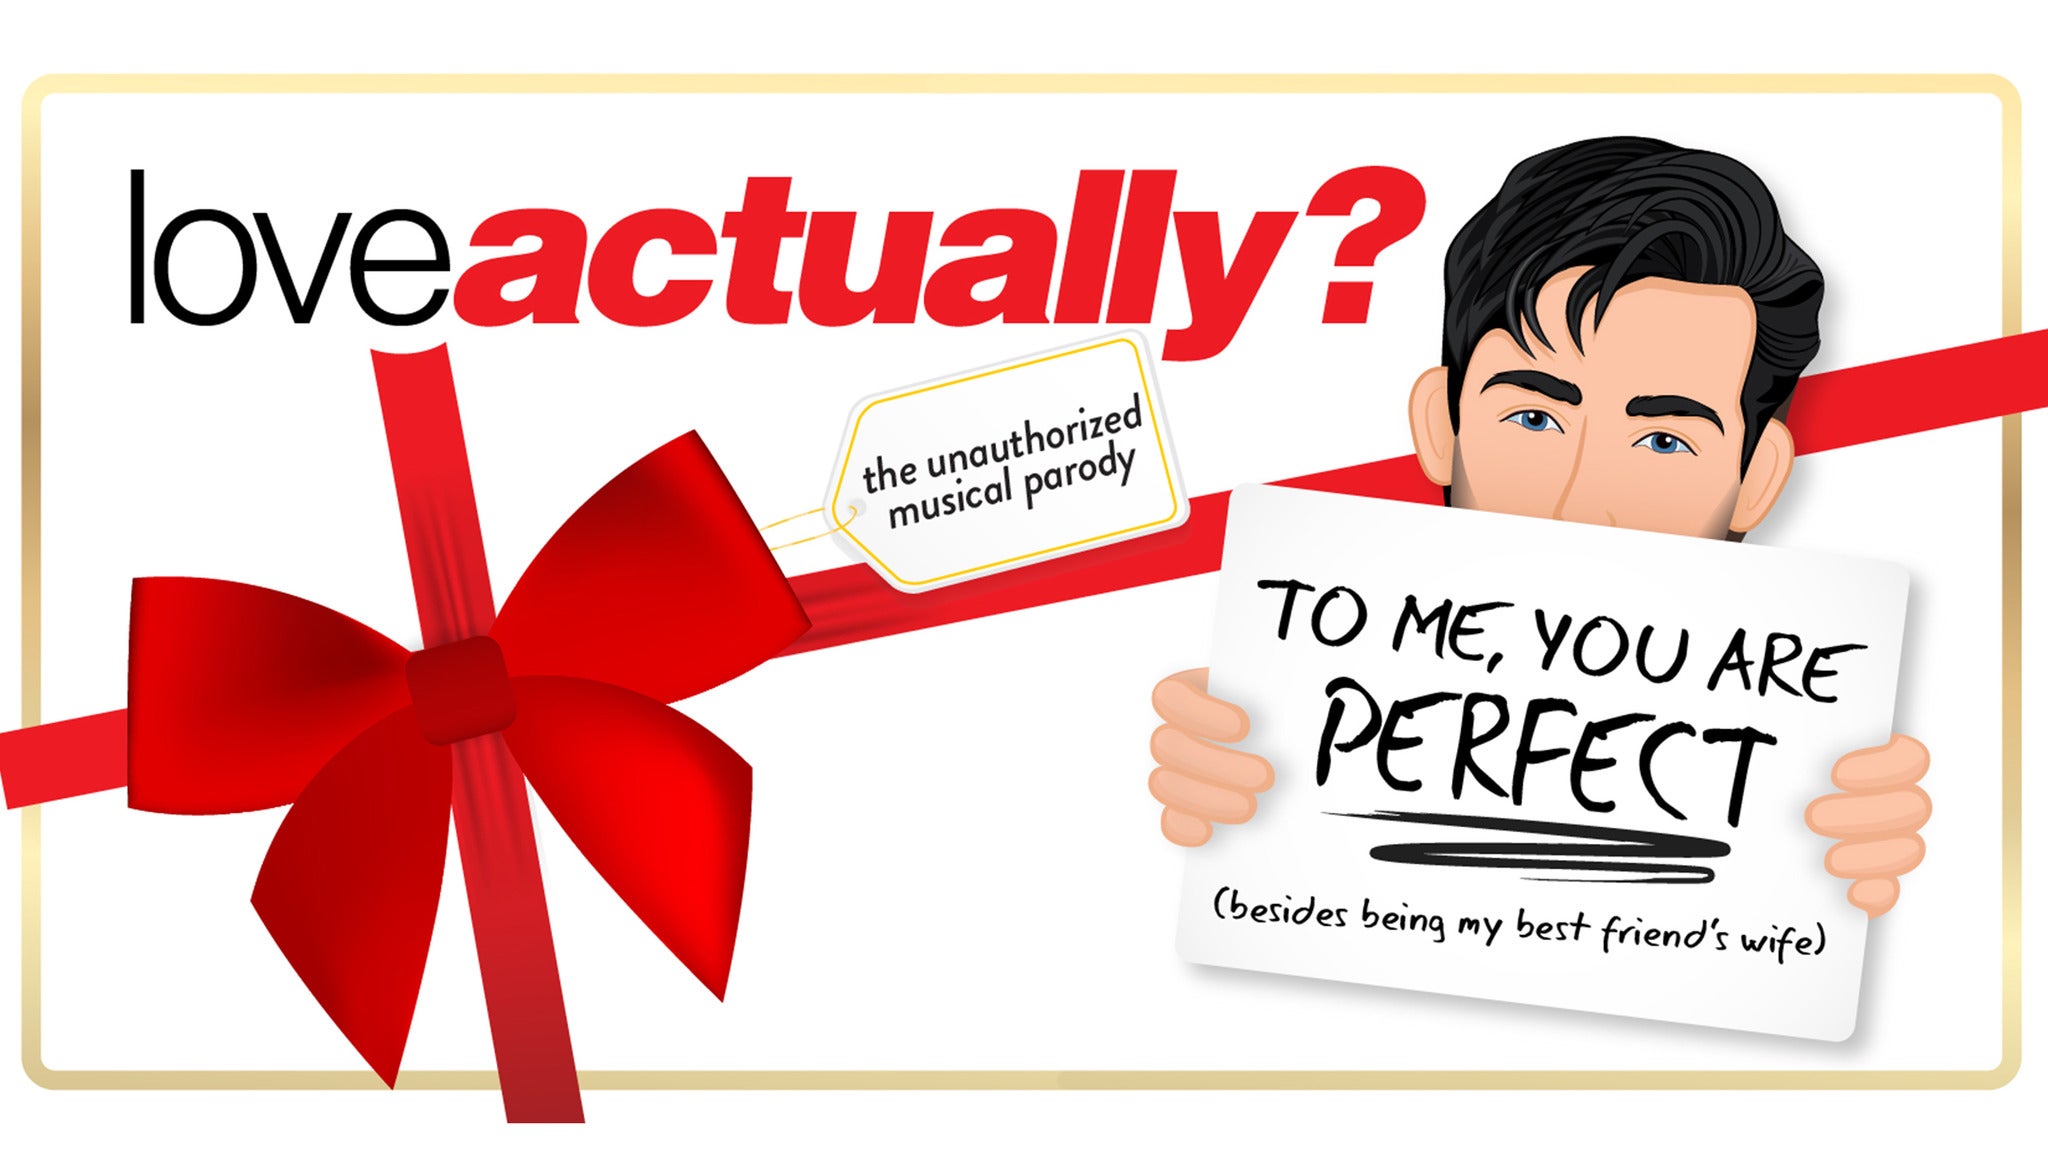 Love Actually The Unauthorized Musical Parody in Chicago promo photo for Me + 3 Promotional  presale offer code